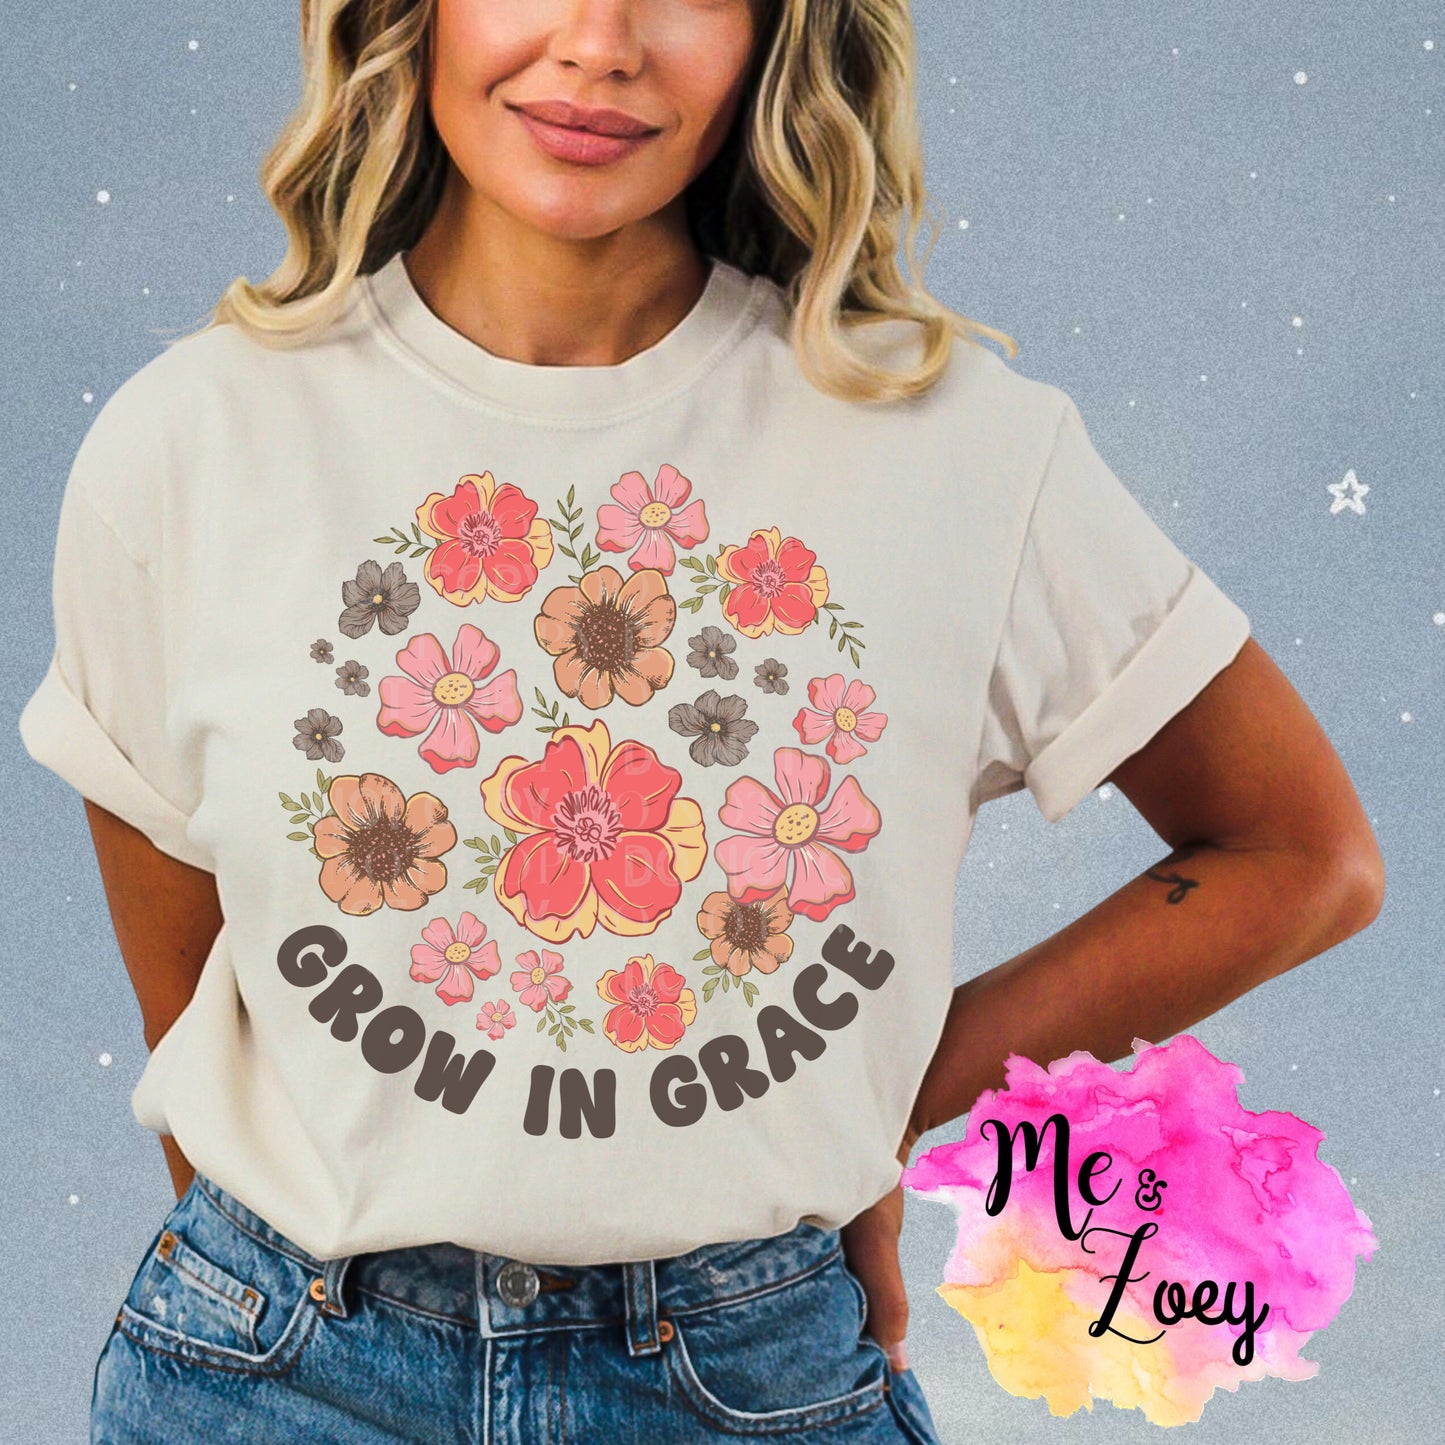 Grow In Grace Graphic Tee - MeAndZoey